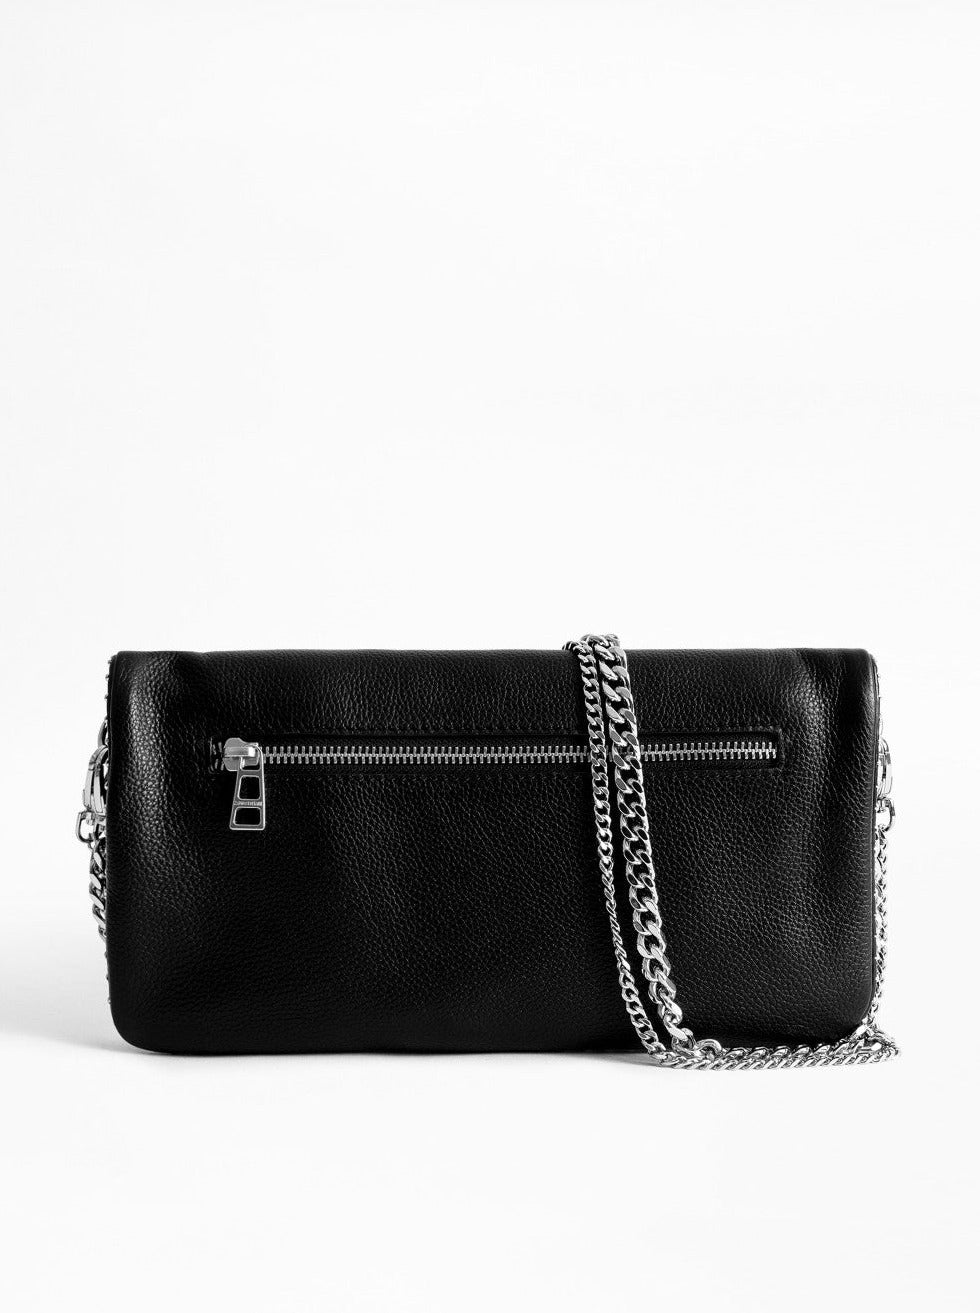 Rock grained leather studs bag, black-silver